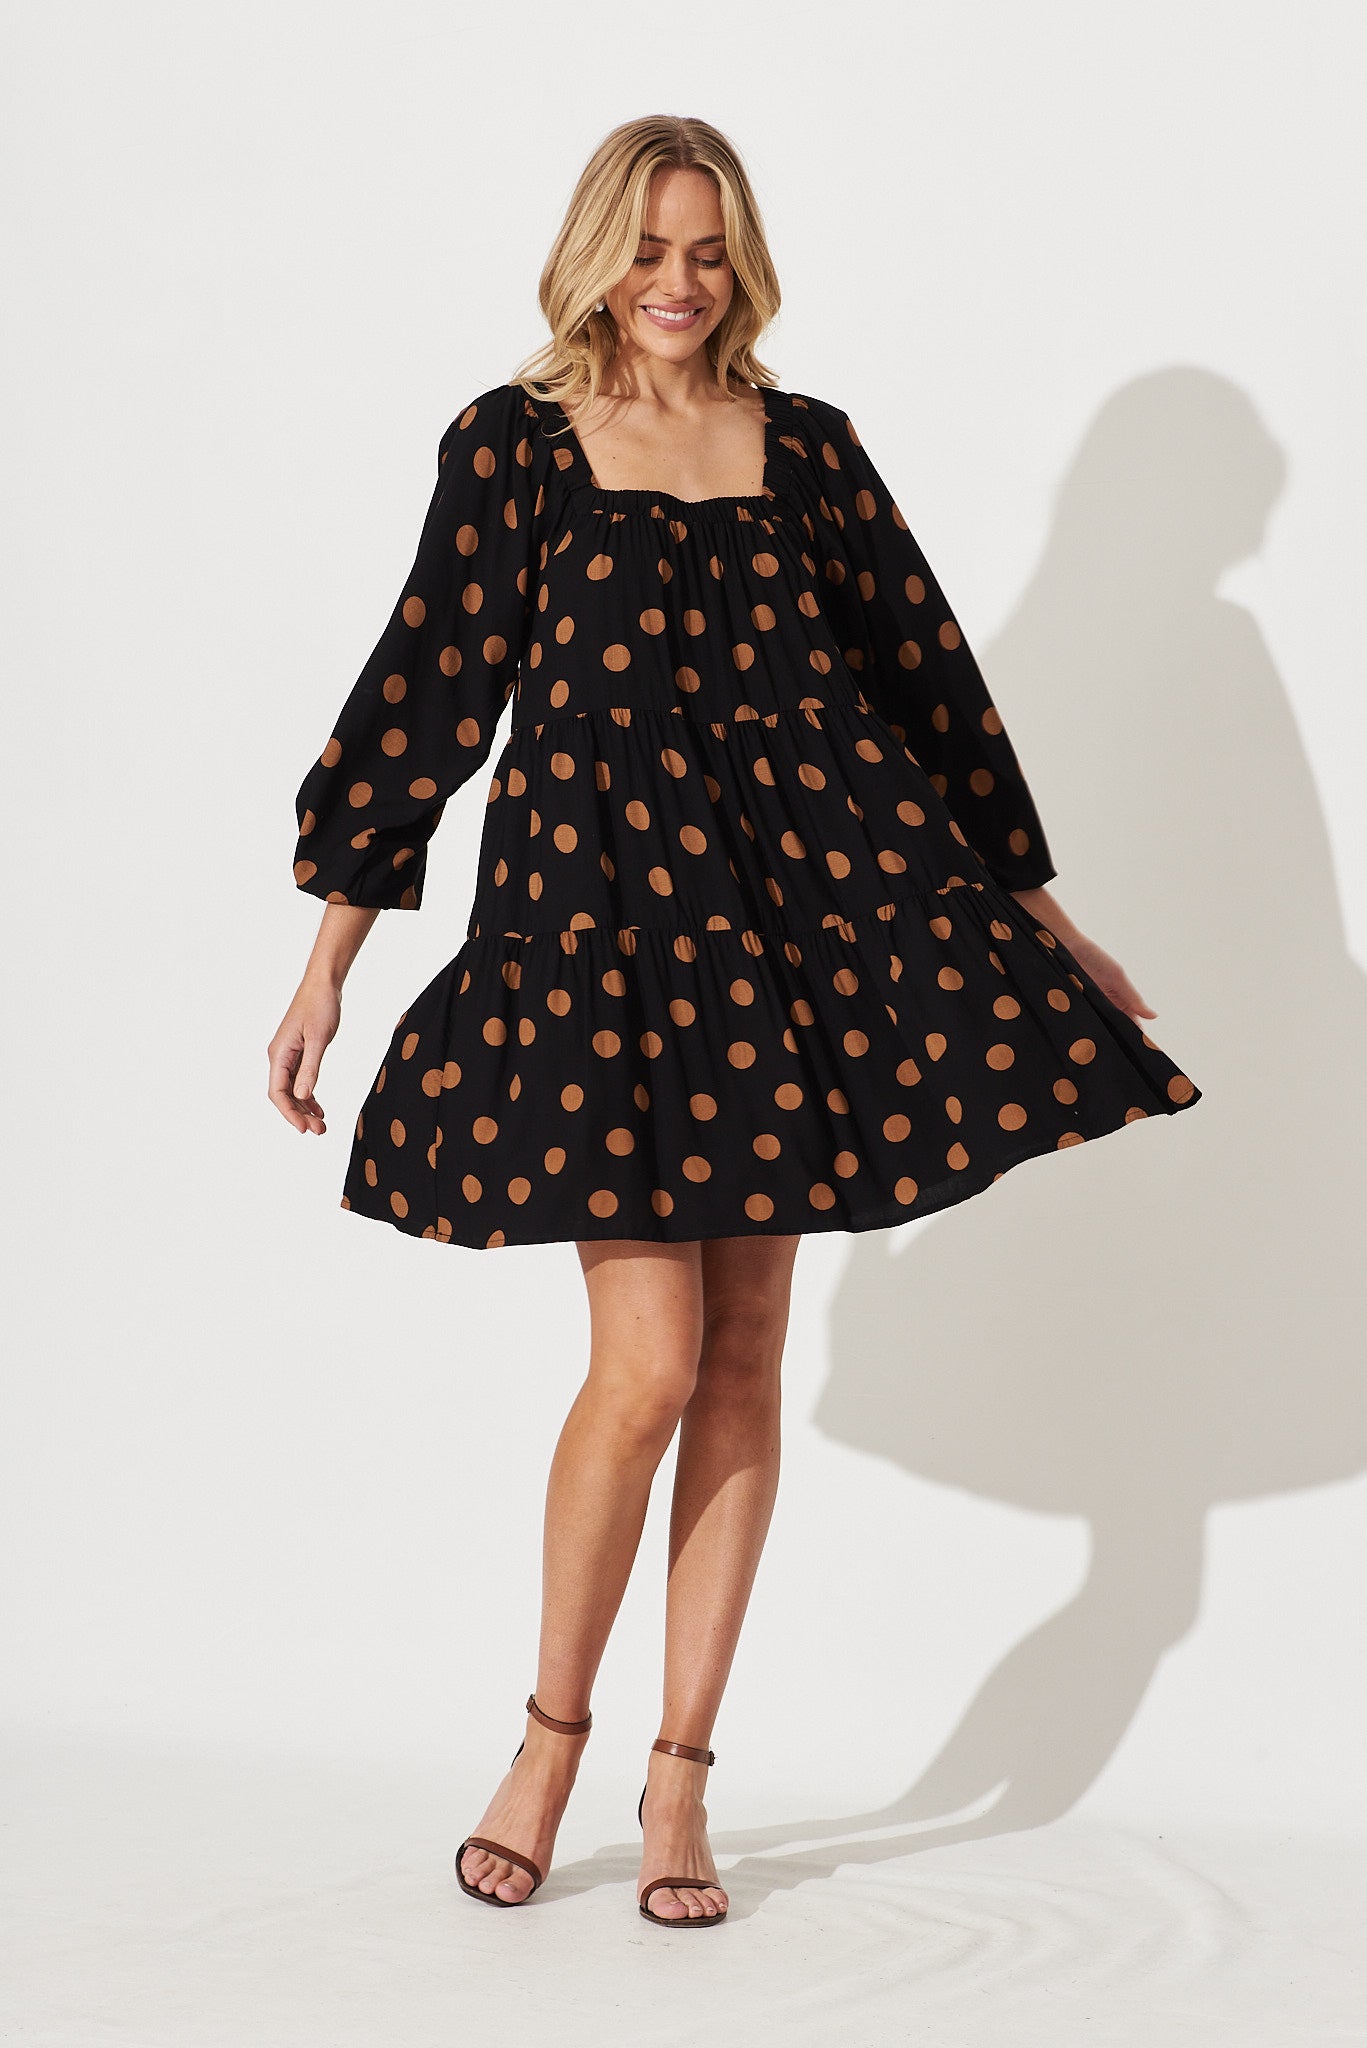 The Tag: This Brand Is Behind That Polka Dot Wrap Dress You See